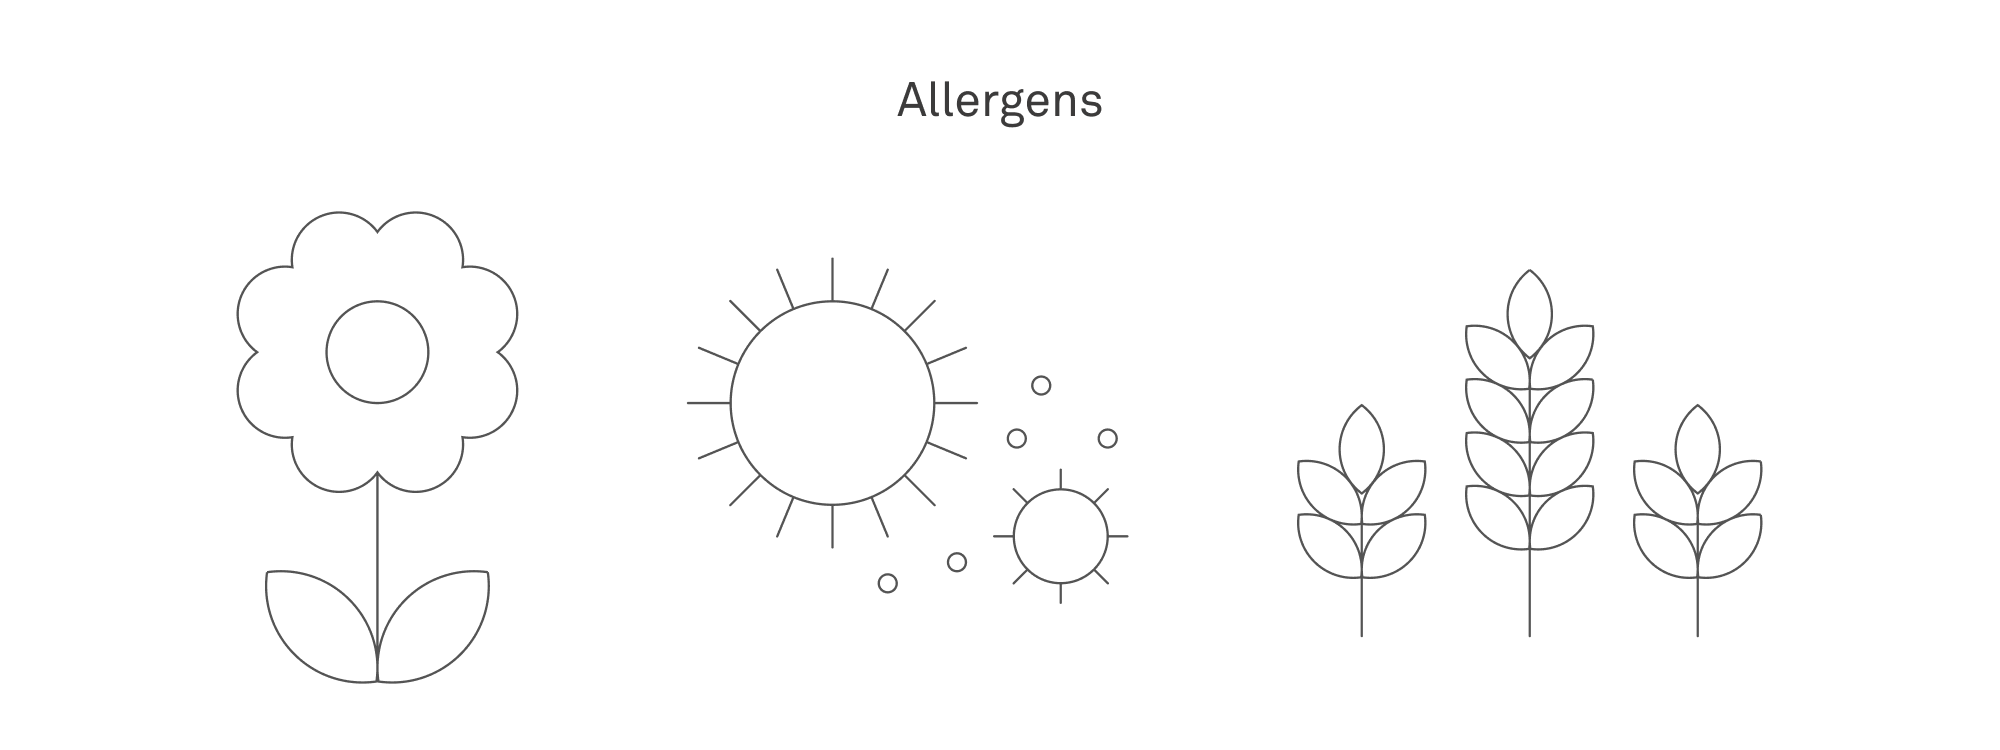 Vector art of allergens, including a flower, pollen, and plants